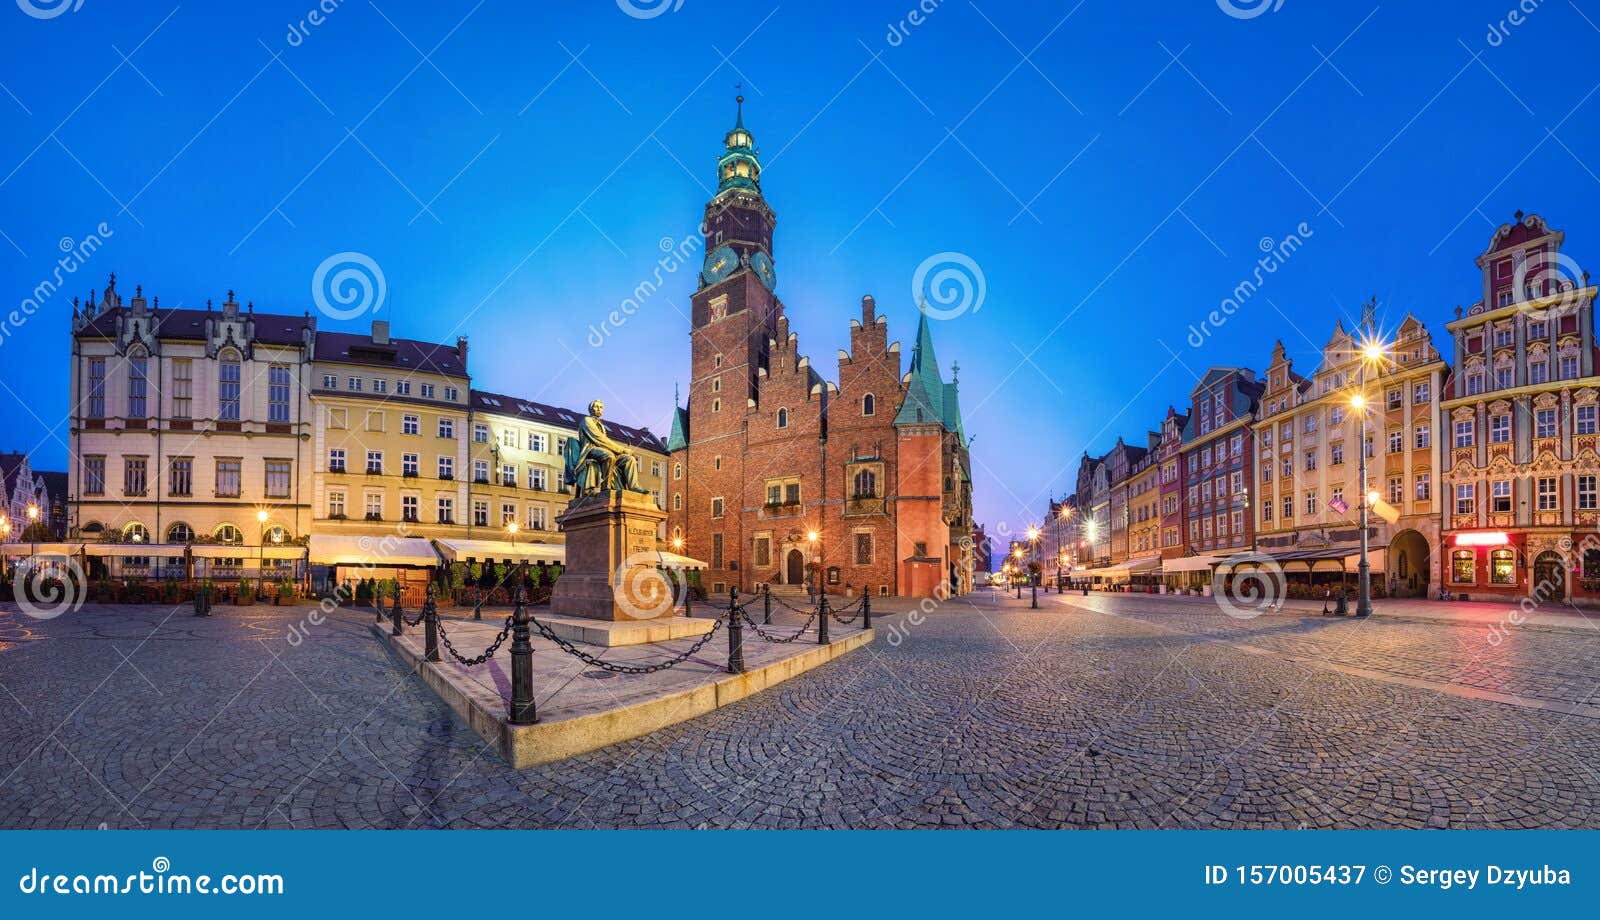 panoramic view of rynek square in wroclaw, poland